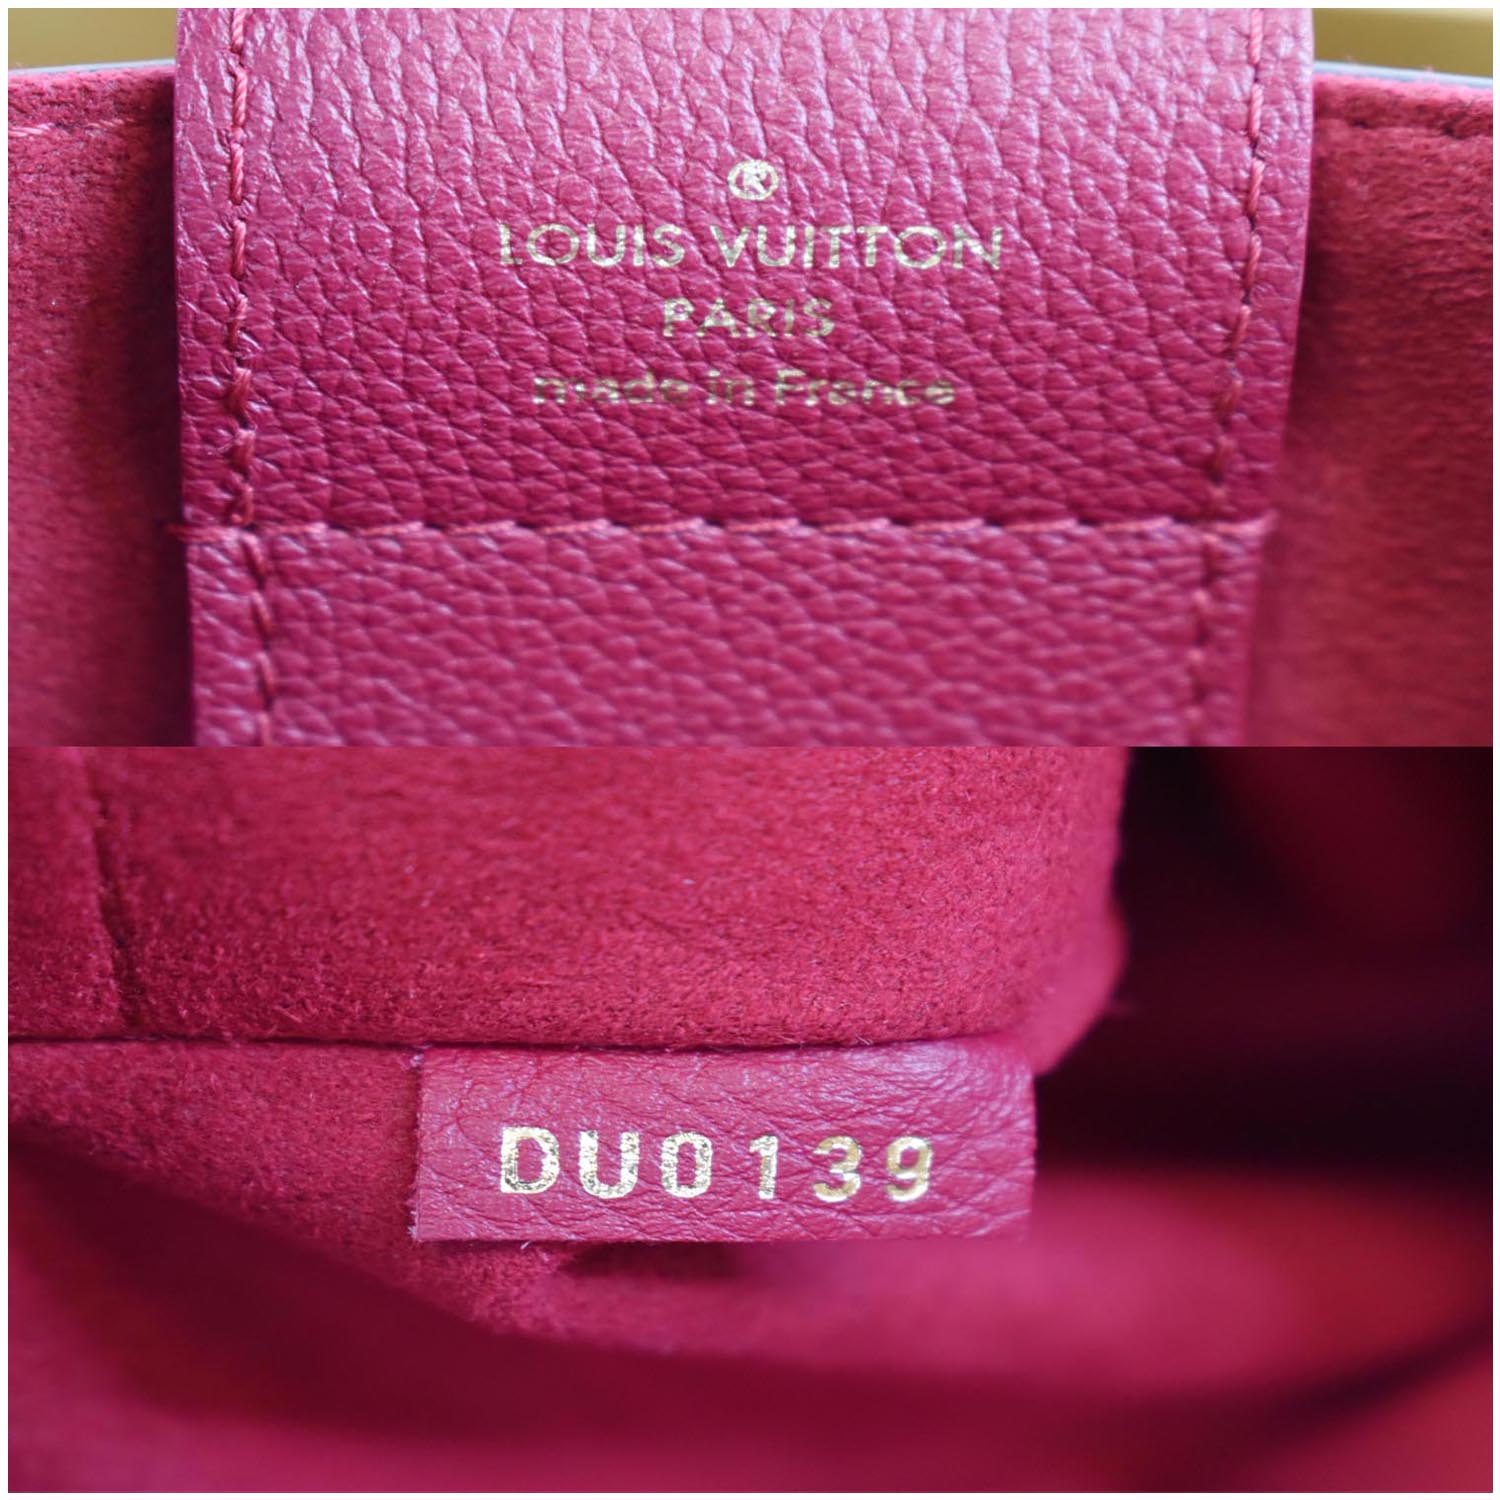 Louis-Vuitton Riverside-Excellent Condition/Barely Used